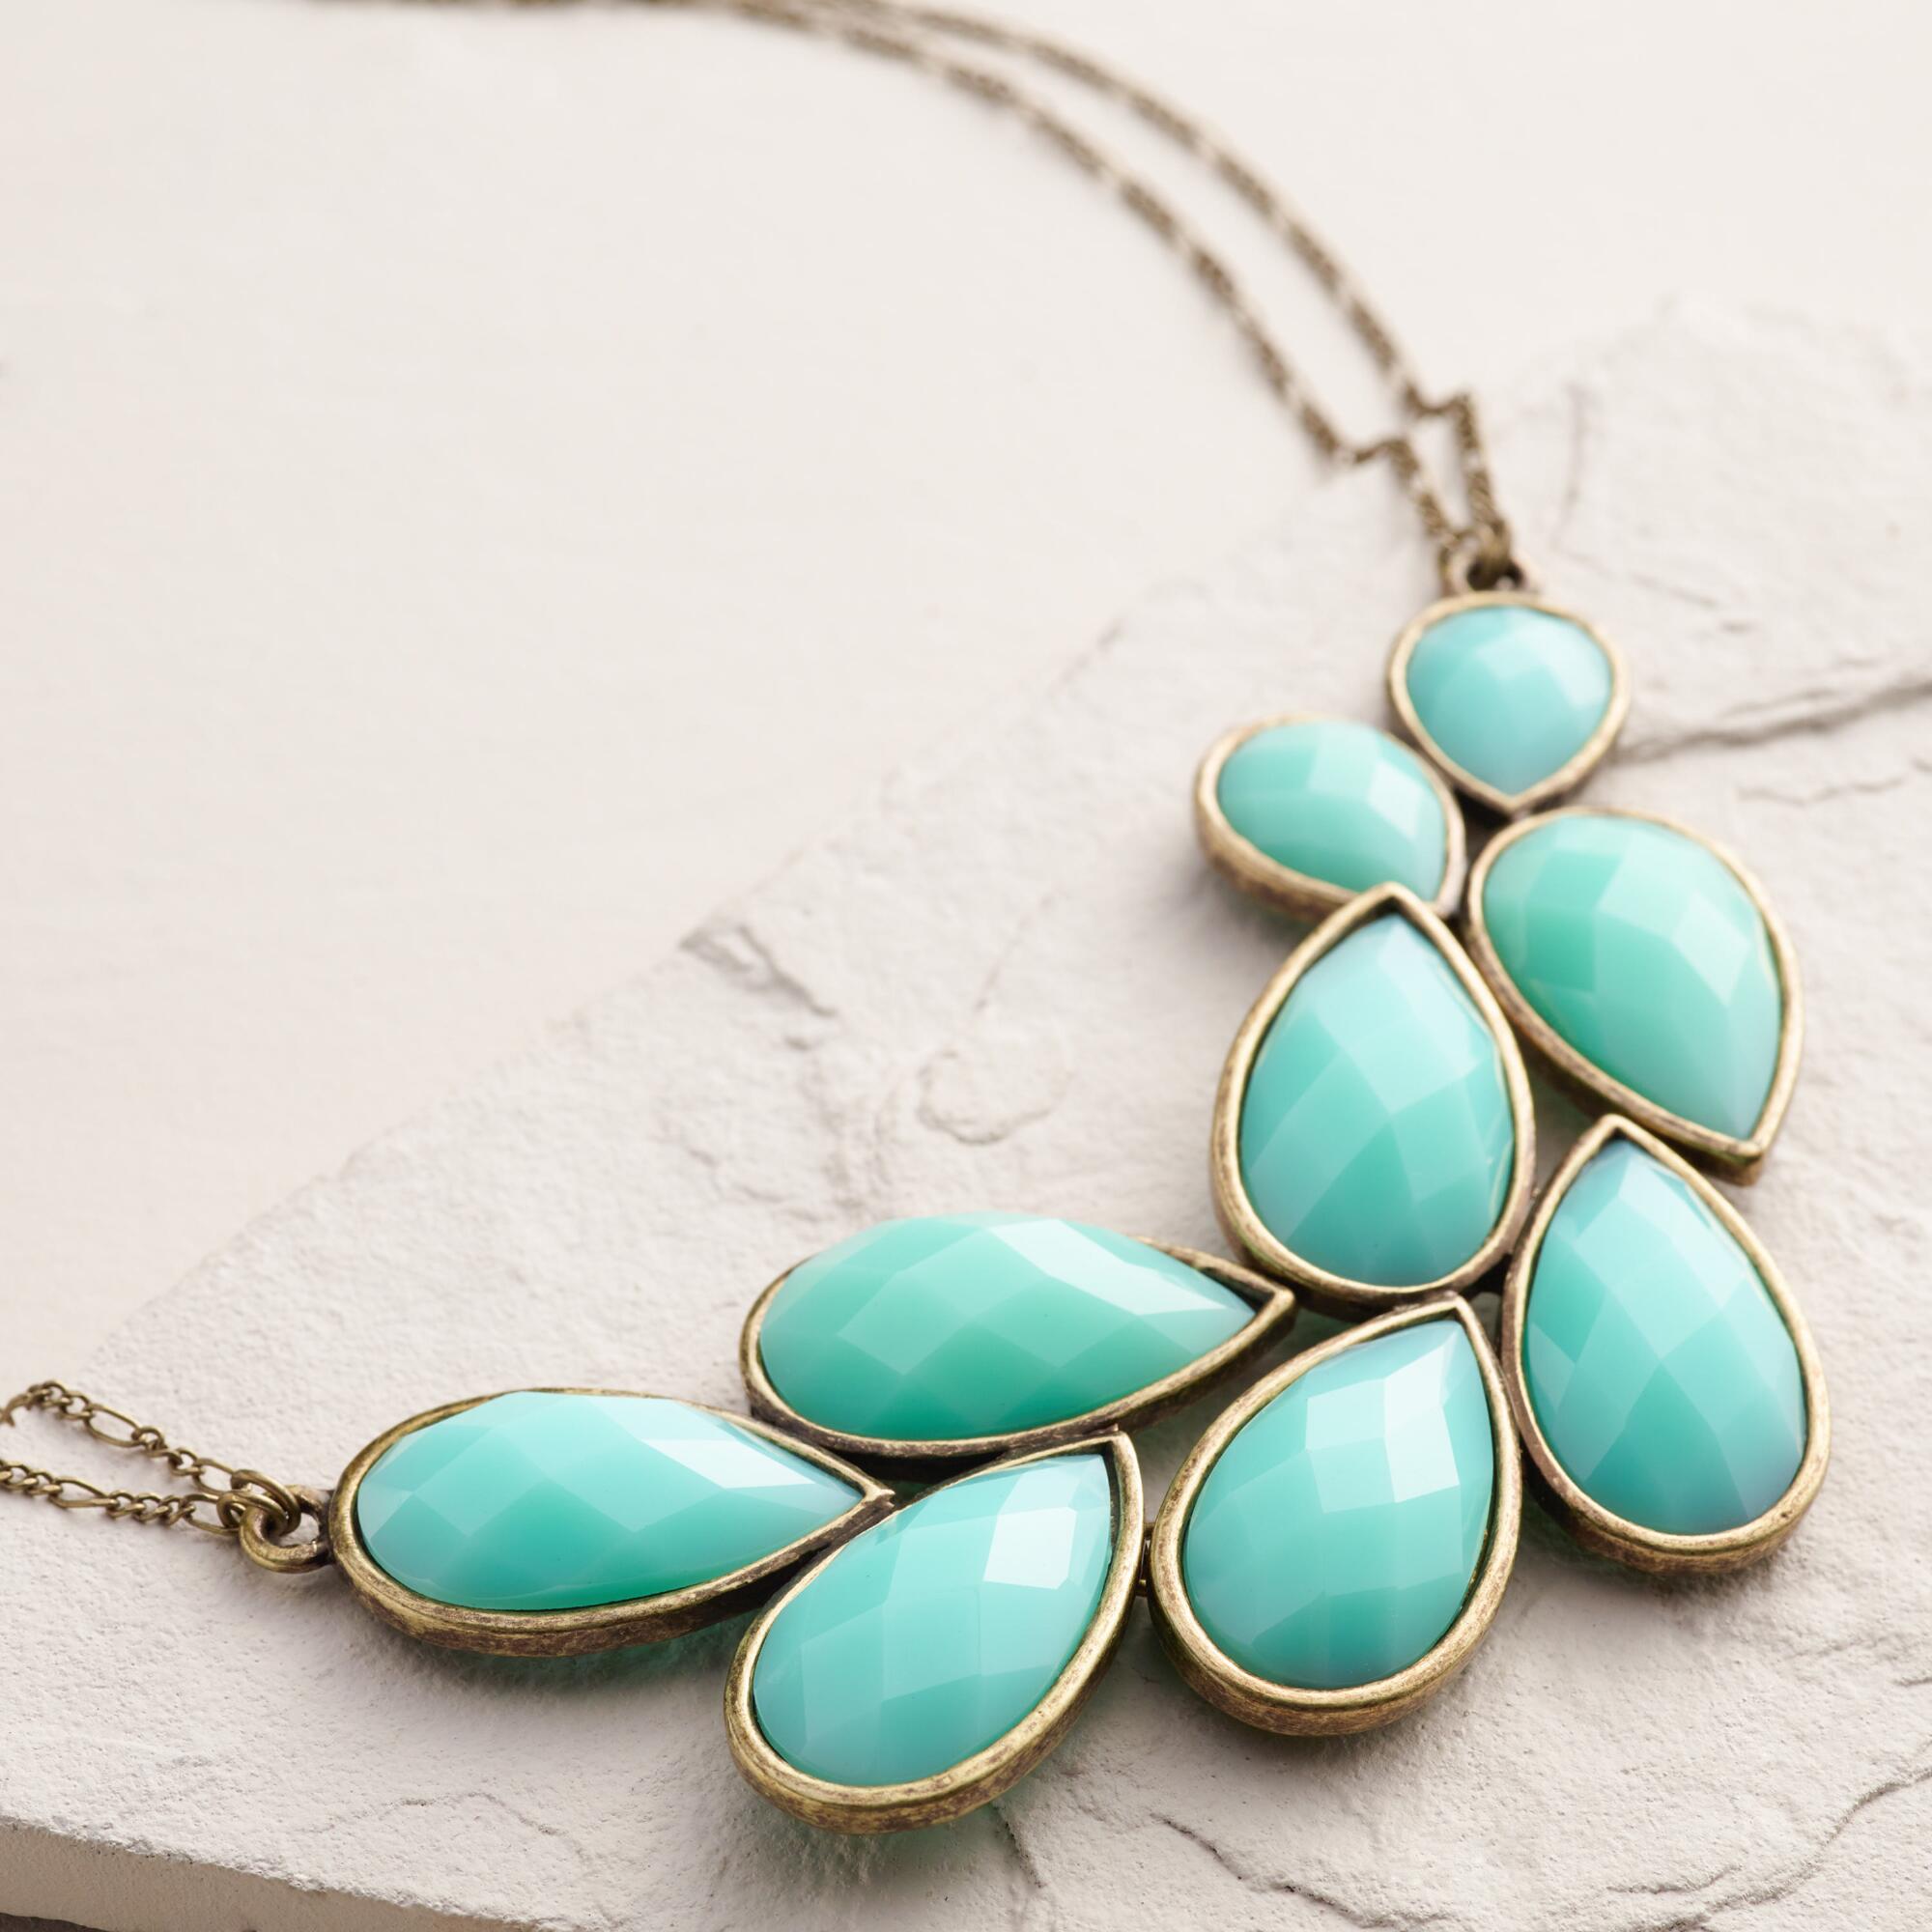 Turquoise Statement Necklace Everything Turquoise